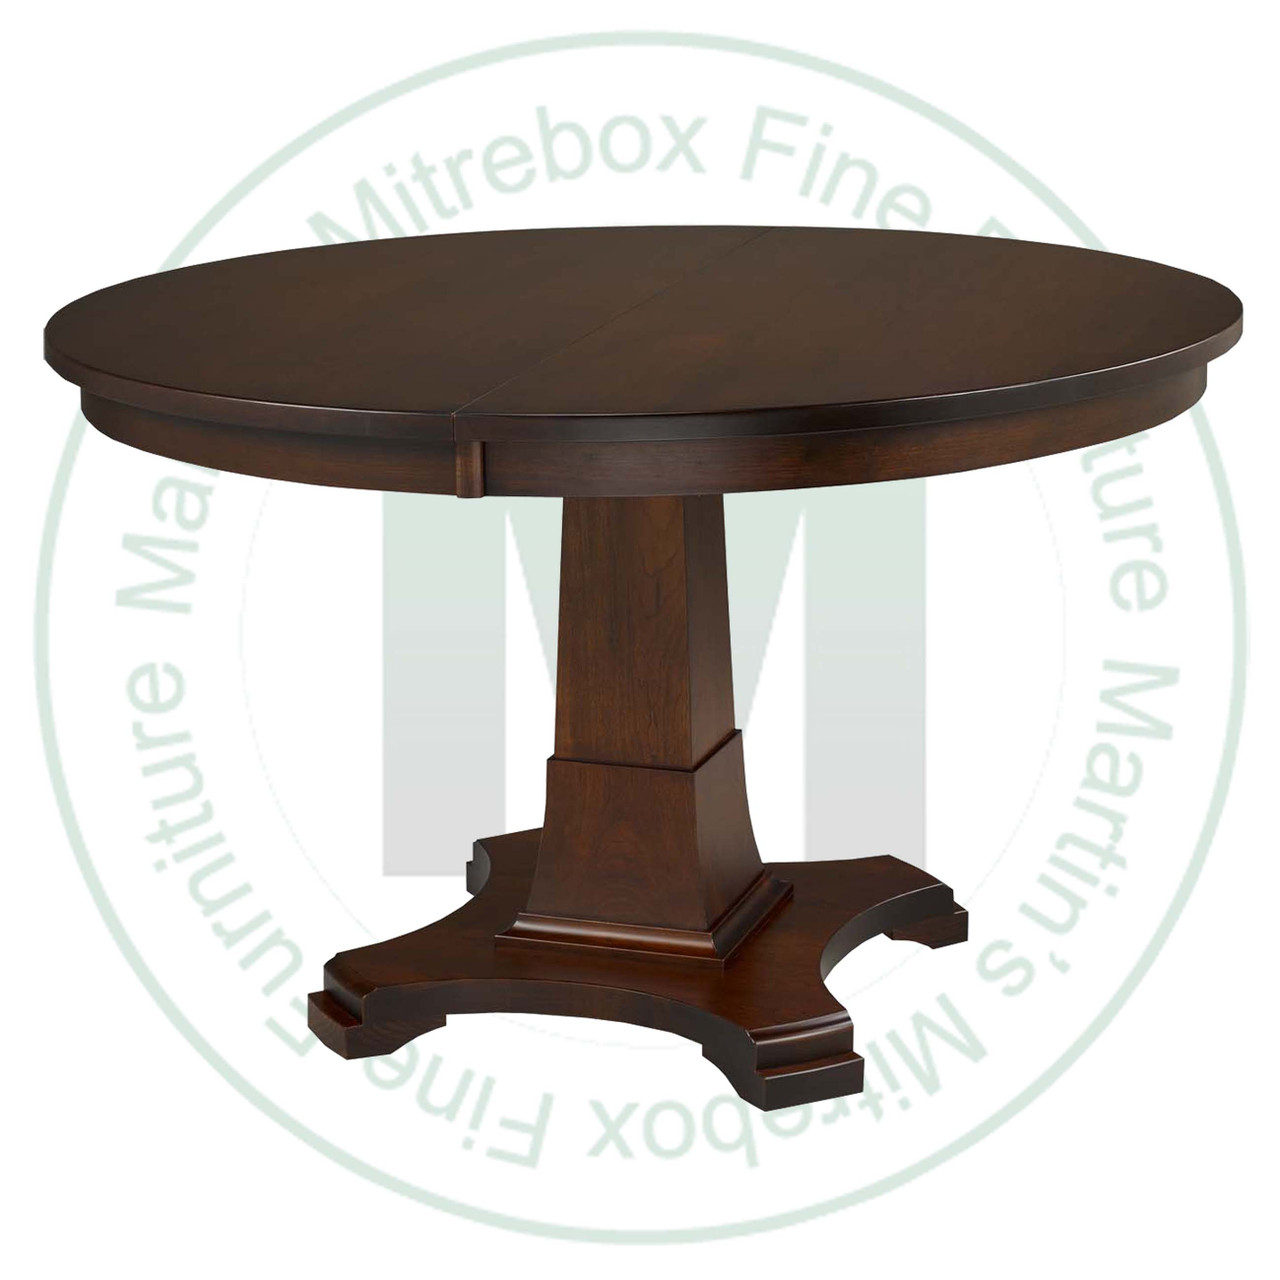 Maple Abbey Single Pedestal Table 60''D x 60''W x 30''H With 2 - 12'' Leaves. Table Has 1.25'' Thick Top